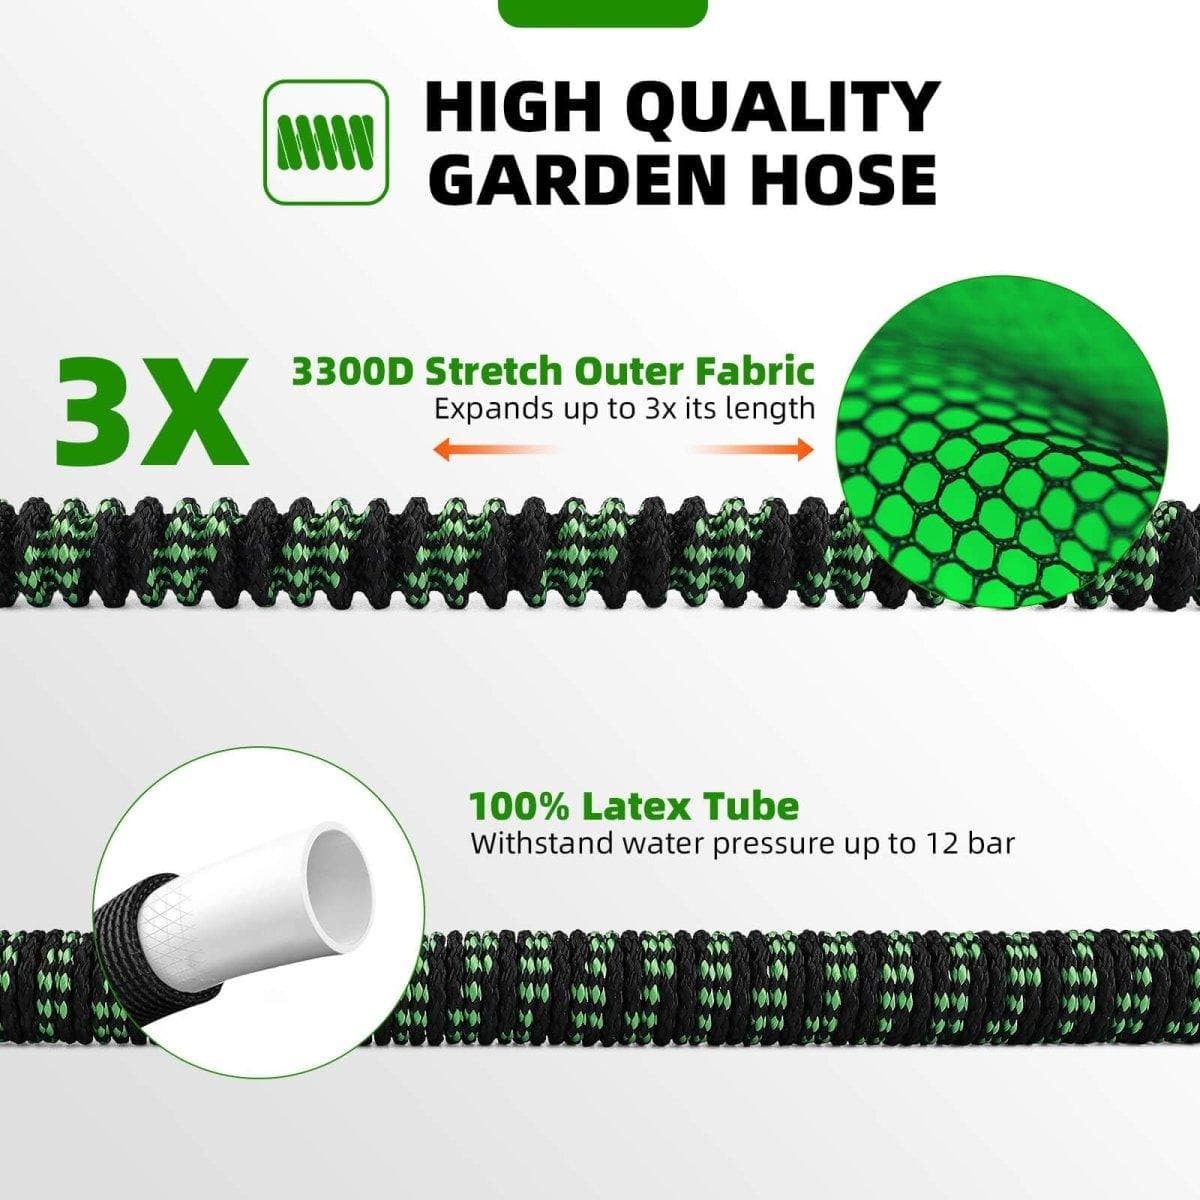 Huepar Flexible 100ft Garden Hose with 4-Layer Latex, 10 Function Spray Nozzle, and Solid Brass Fittings for Efficient Irrigation1